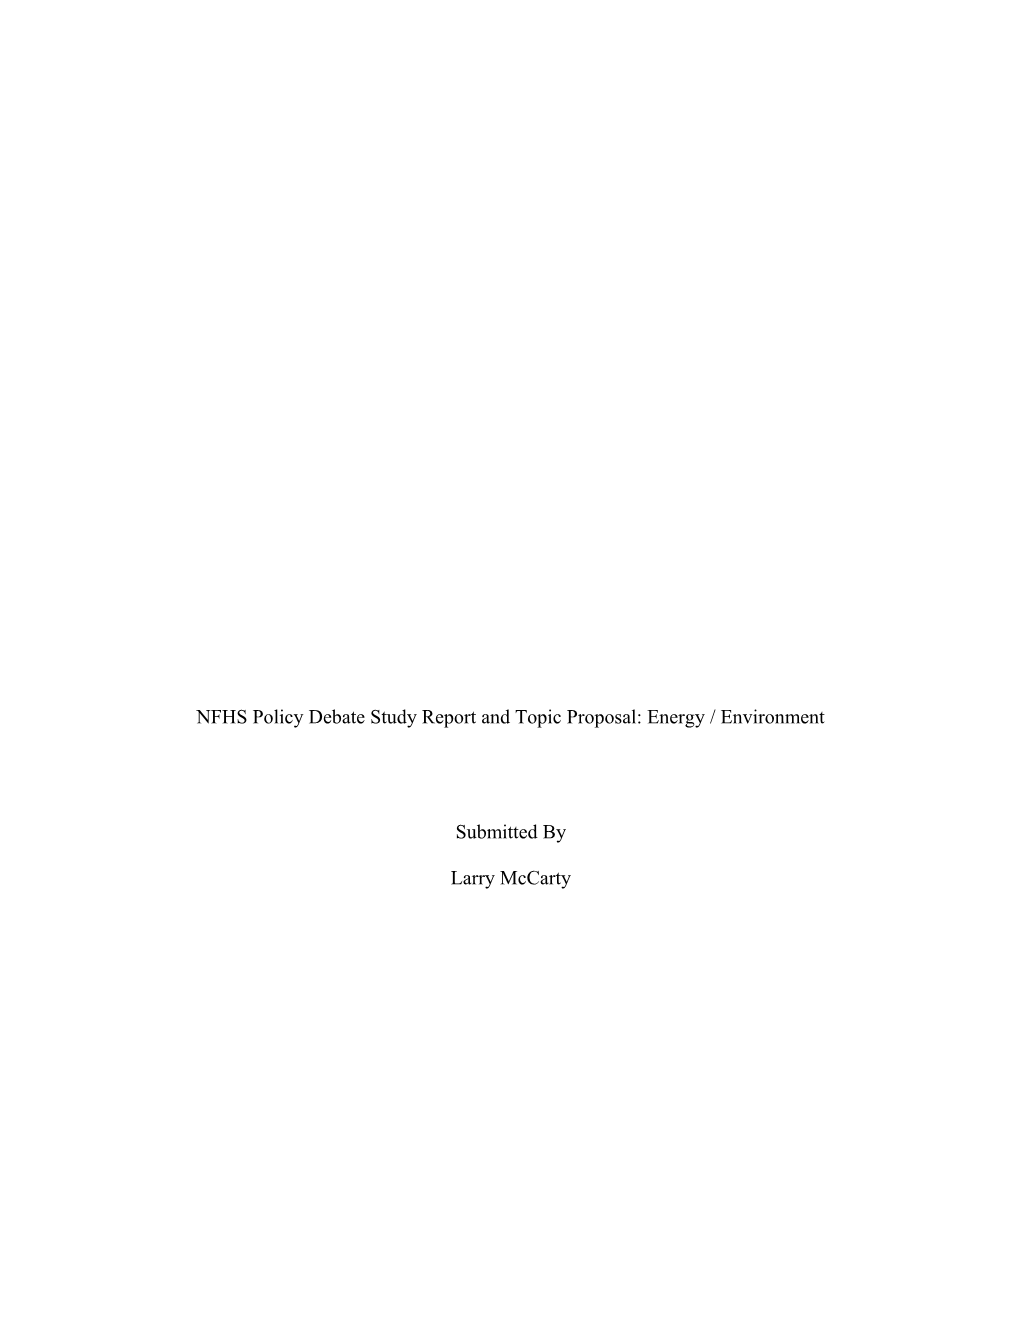 NFHS Policy Debate Study Report and Topic Proposal: Energy / Environment